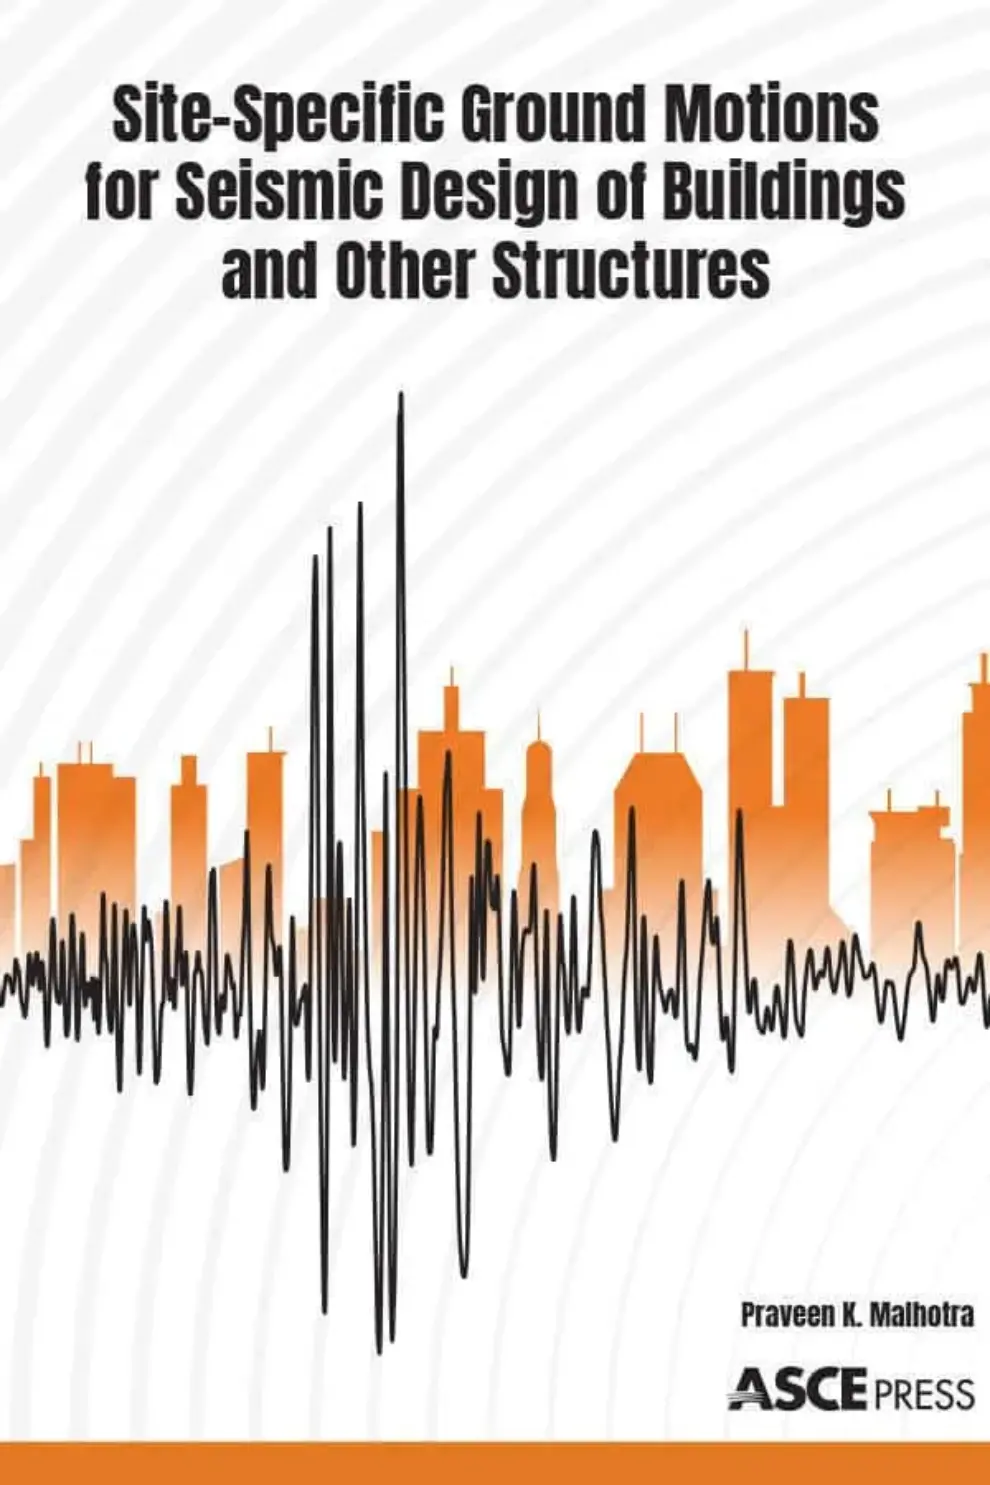 New ASCE Press Book Aids Stakeholders in Understanding  Seismic Ground Motion